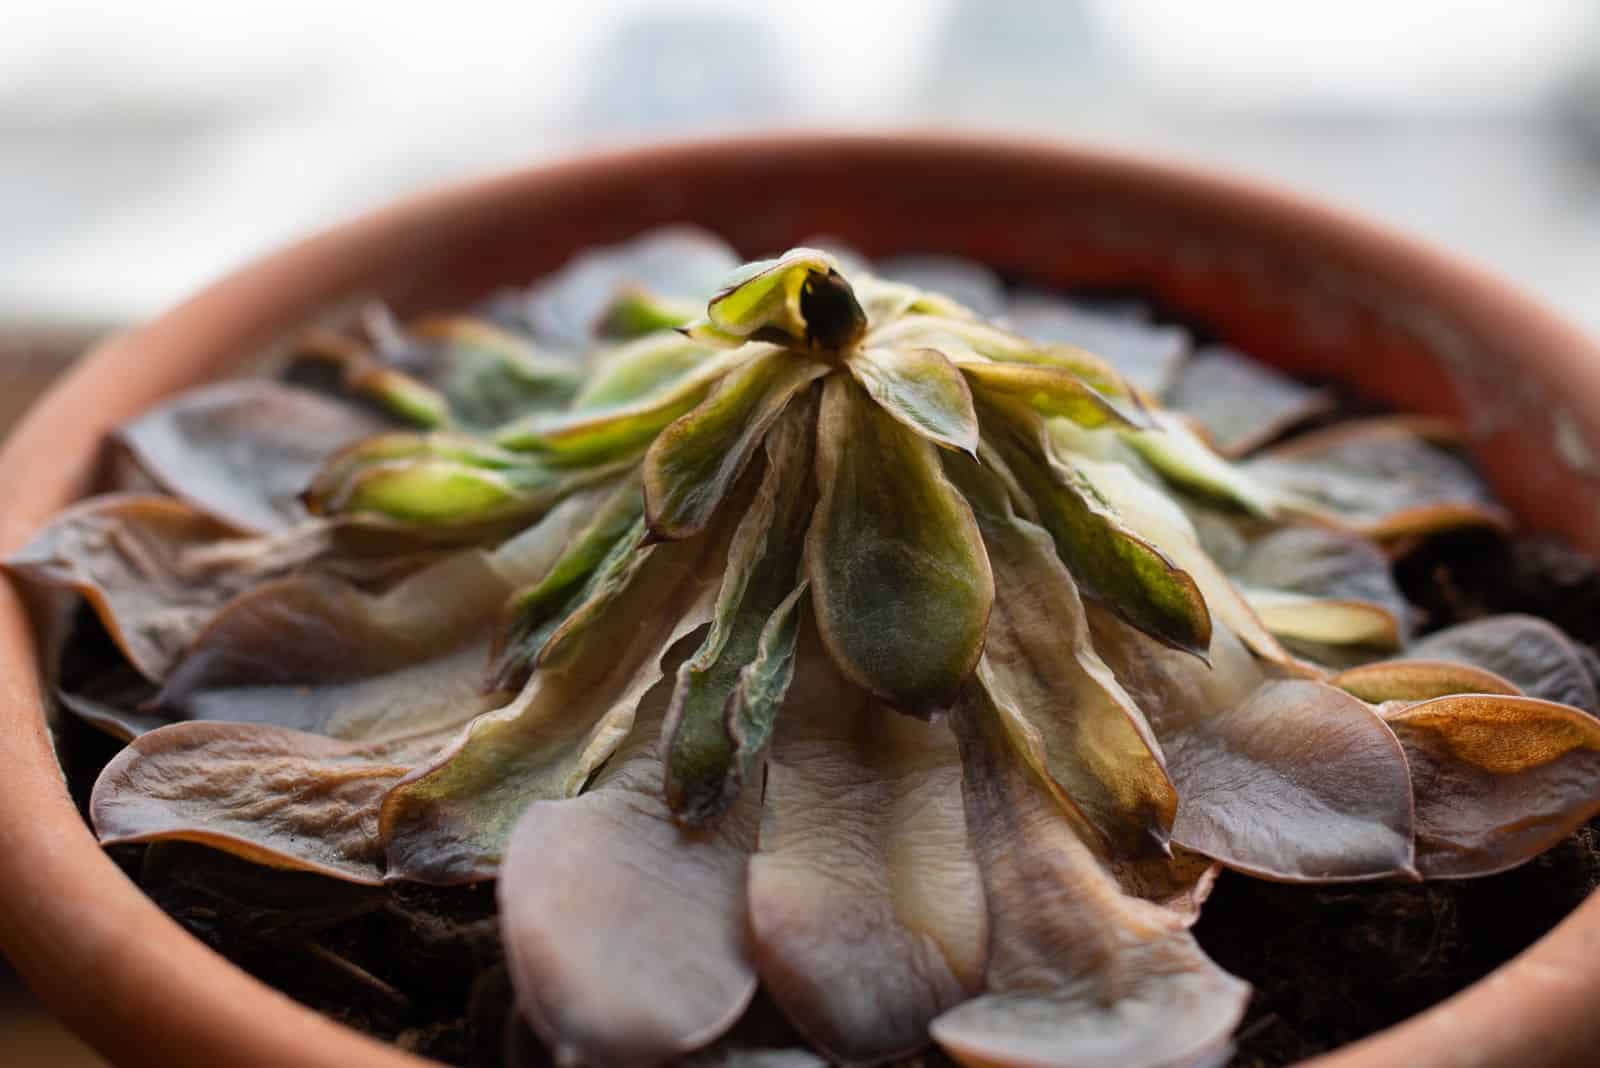 Why Is My Succulent Dying? 9 Helpful Reasons And Solutions